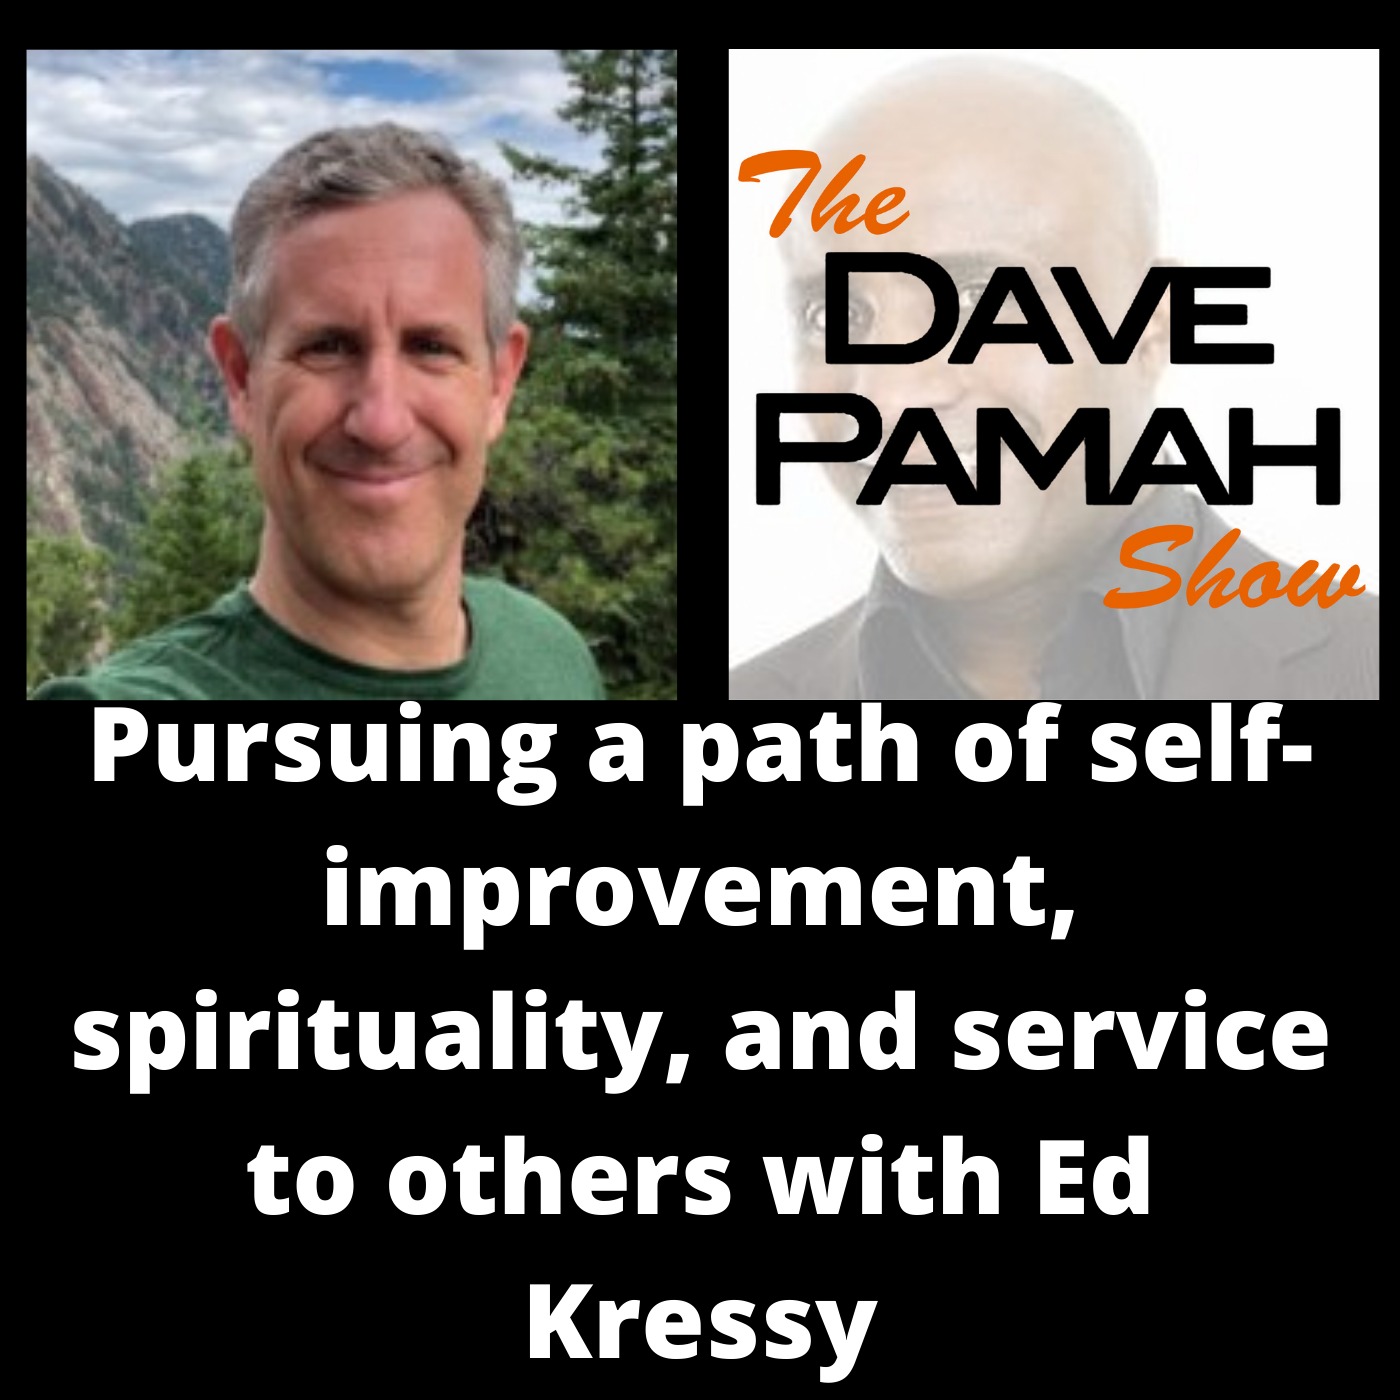 Pursuing a path of self-improvement, spirituality, and service to others with Ed Kressy